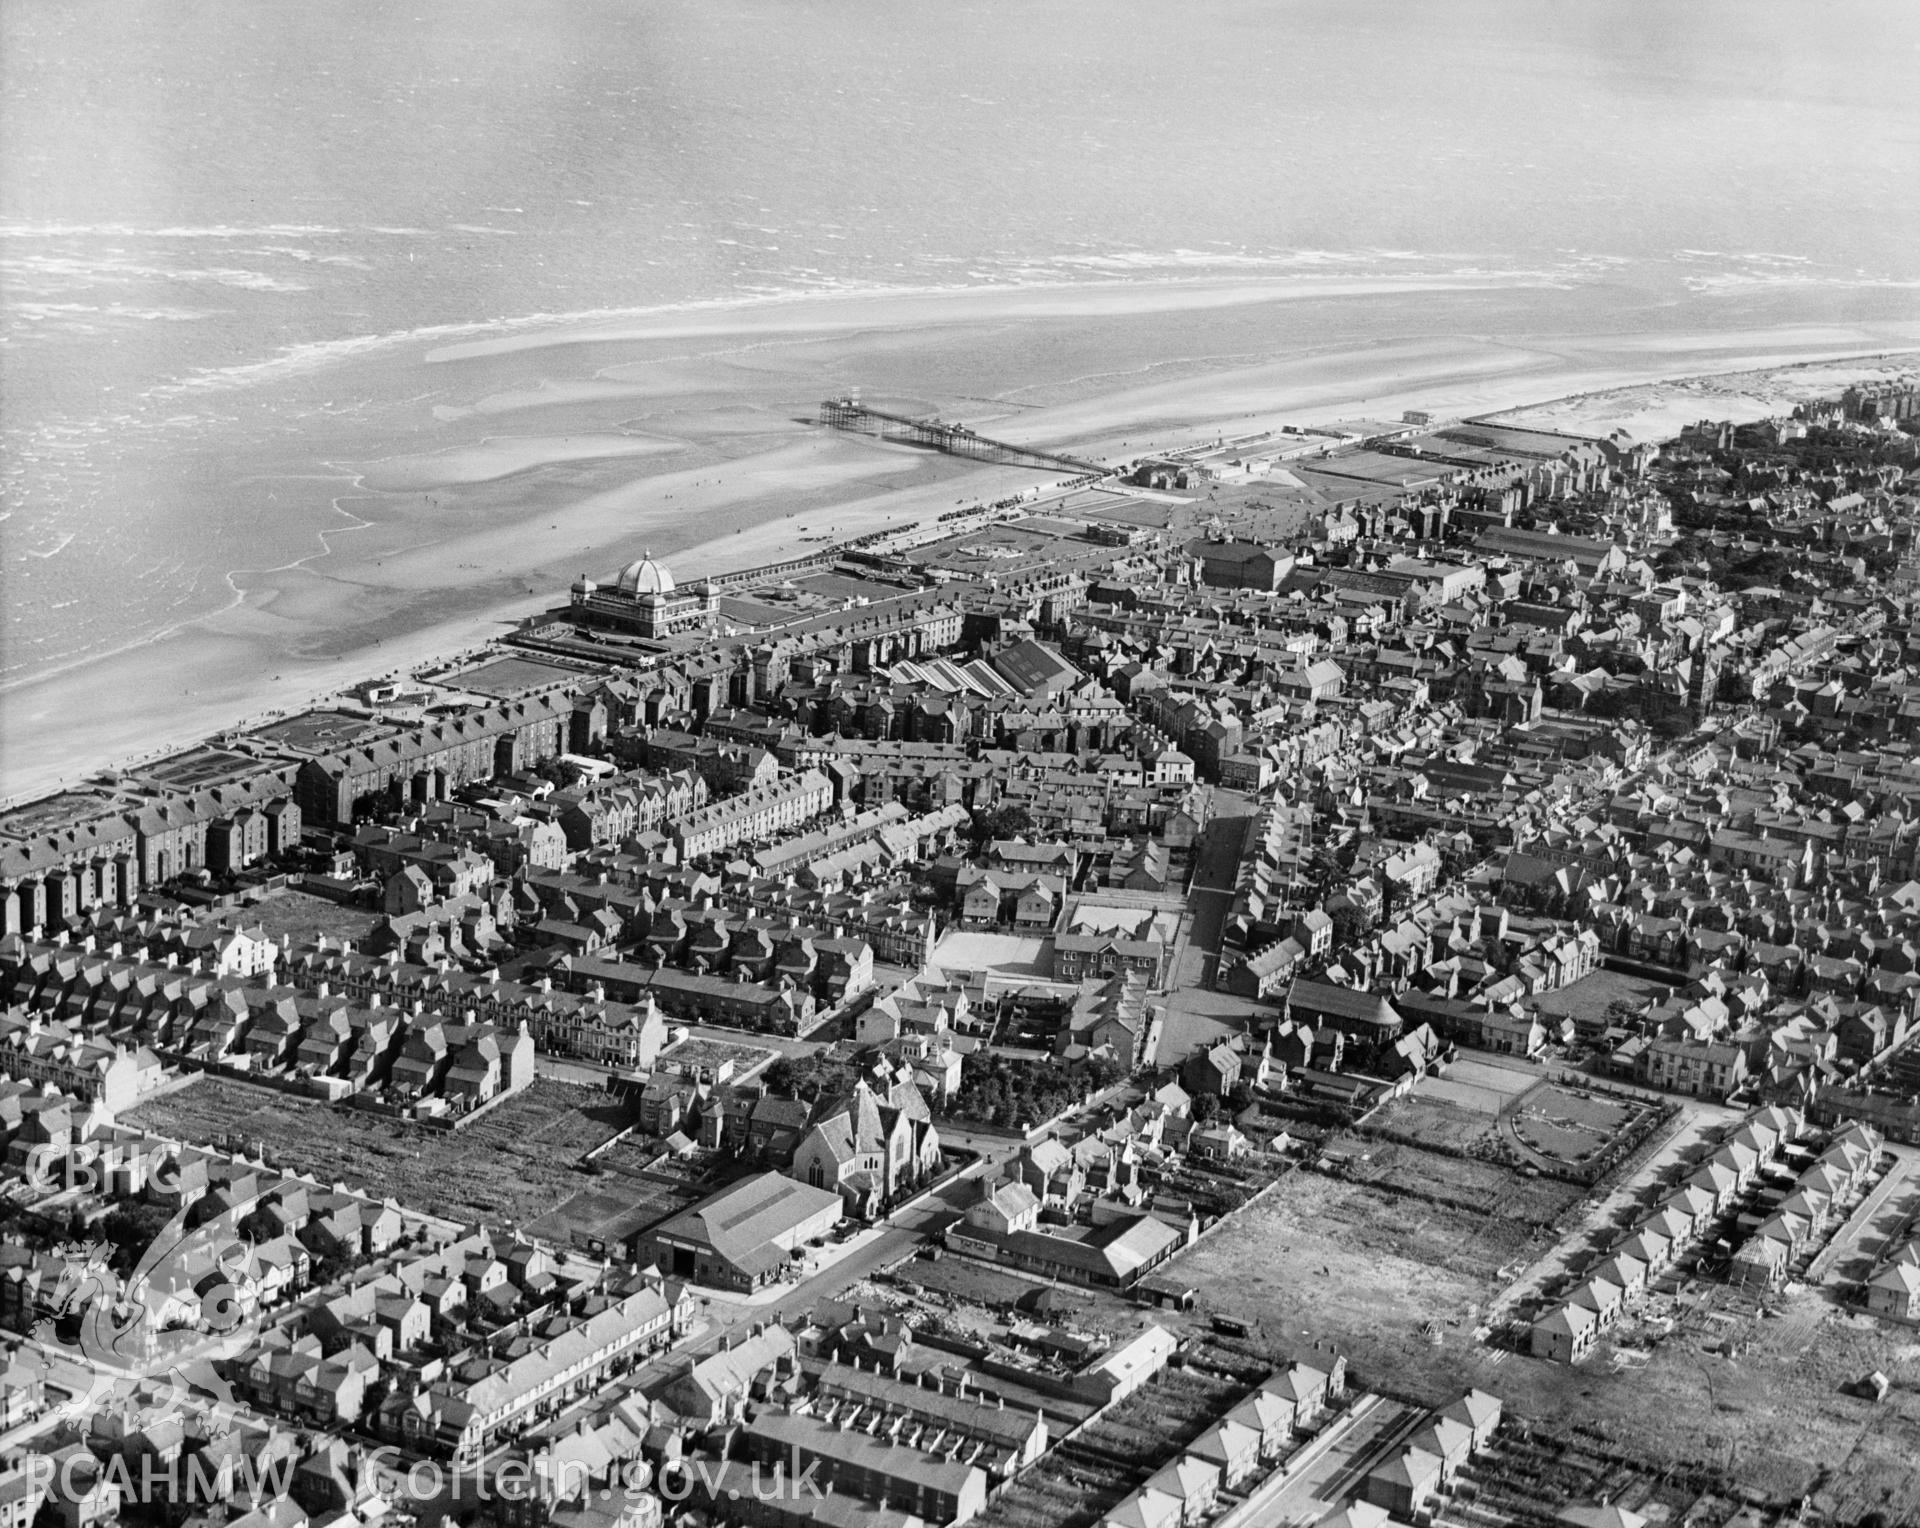 General view of Rhyl, oblique aerial view. 5?x4? black and white glass plate negative.